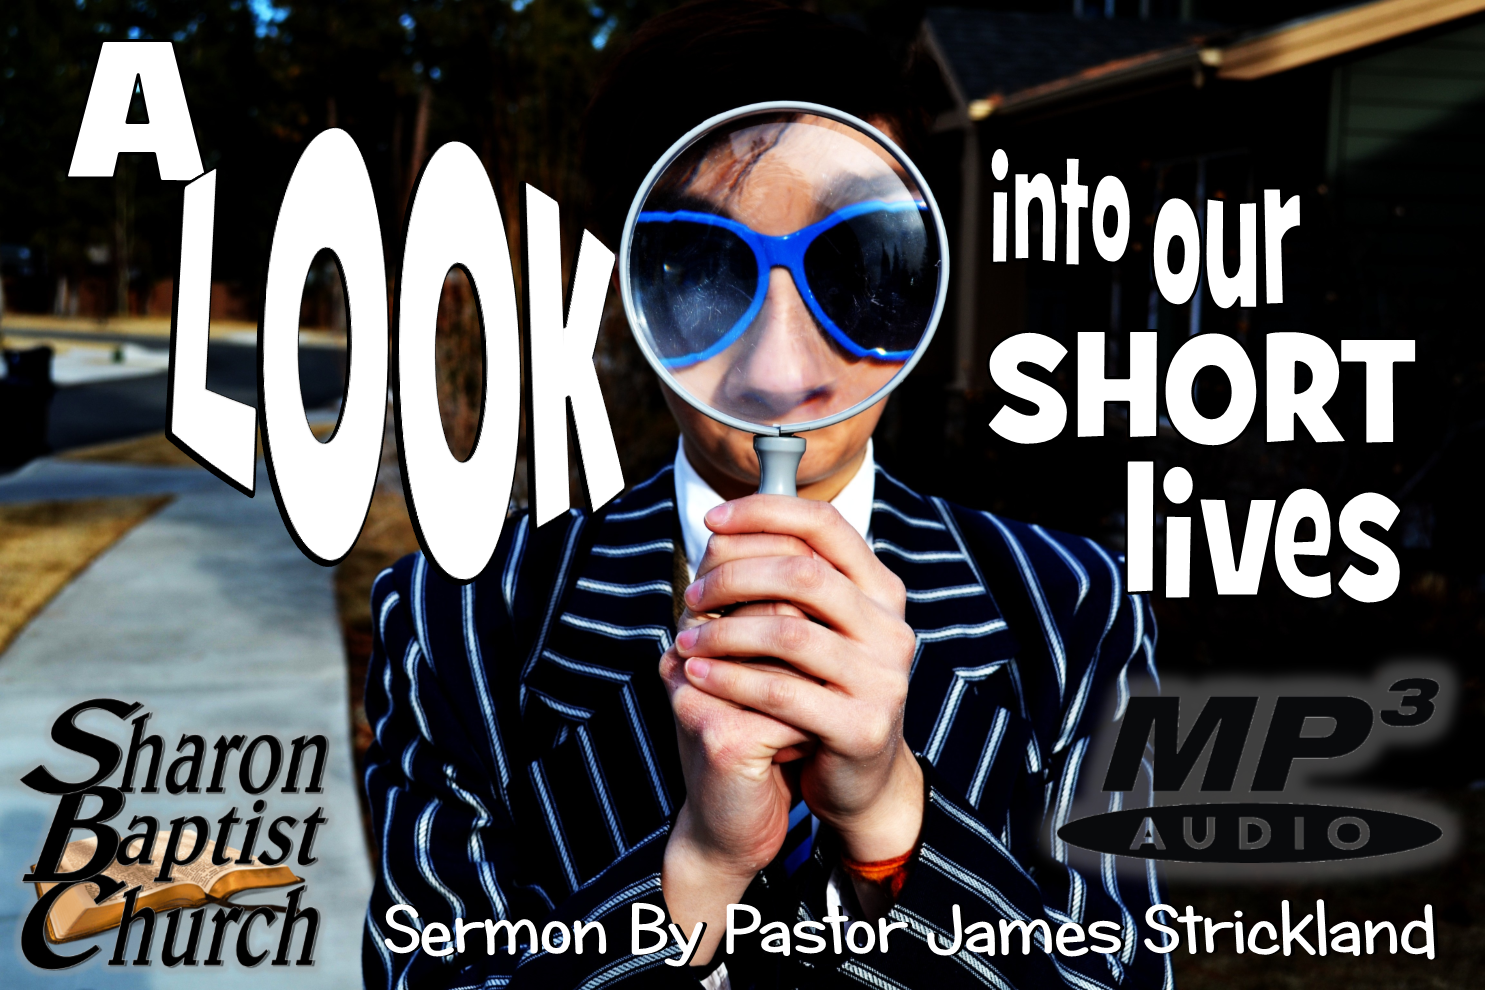 A look into our short lives SERMON AUDIO mp3